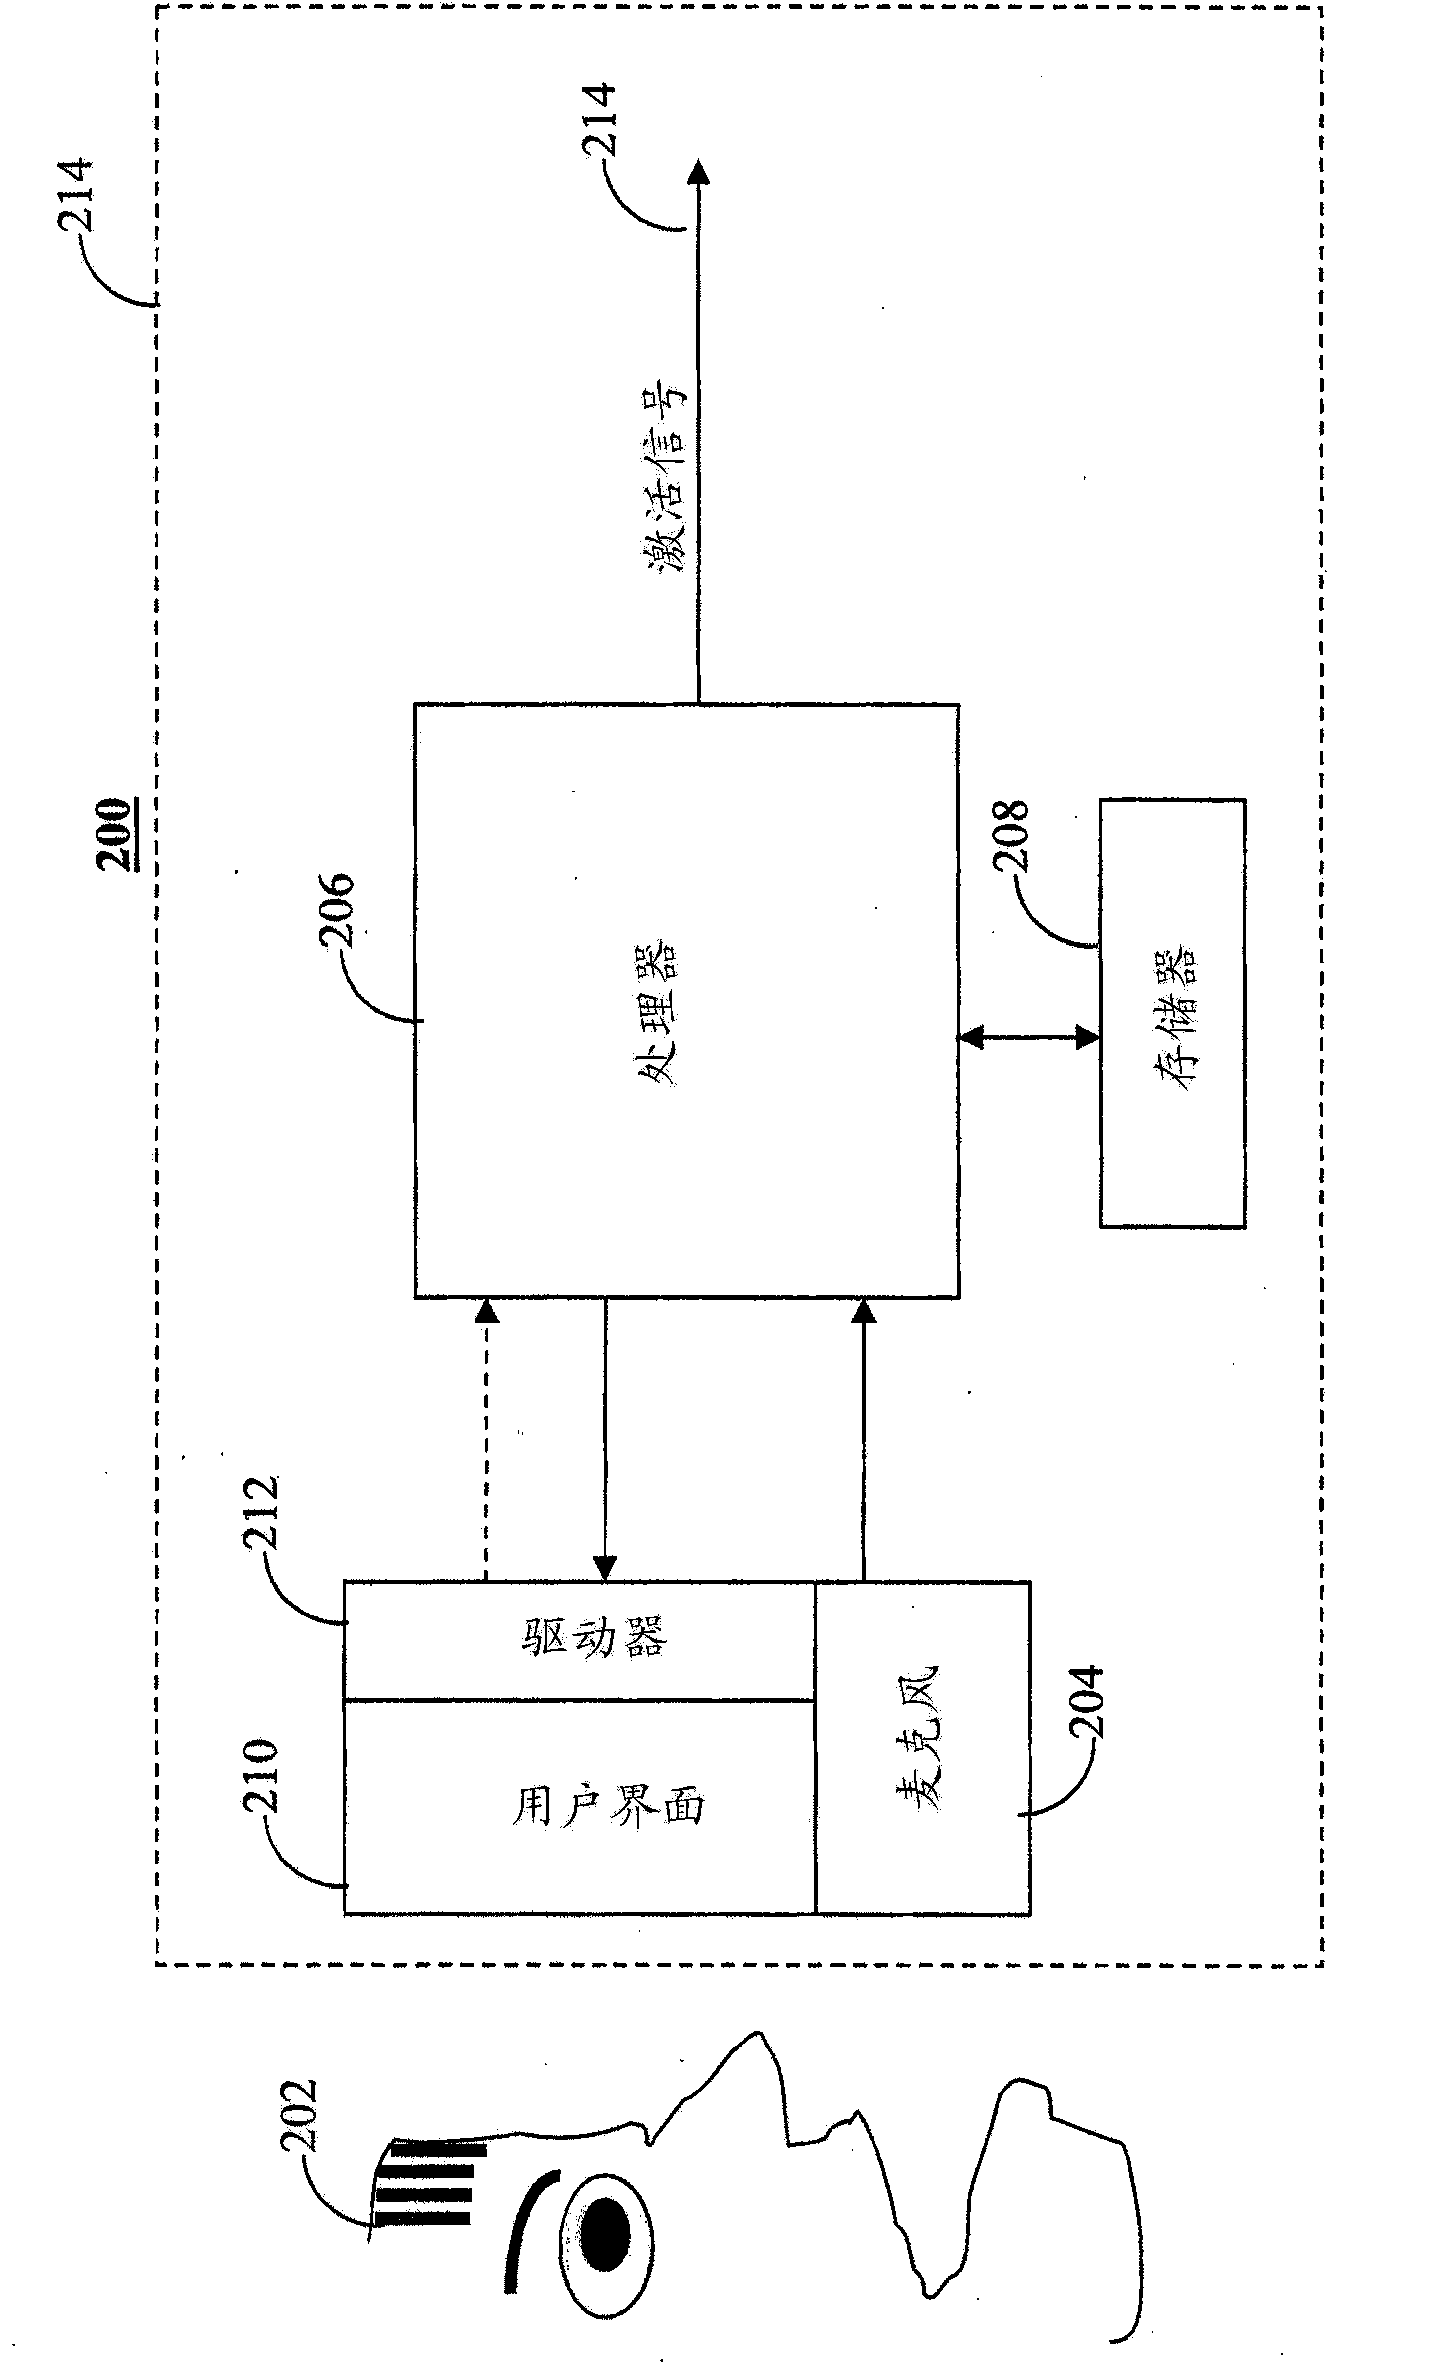 Method and system for dual scoring for text-dependent speaker verification